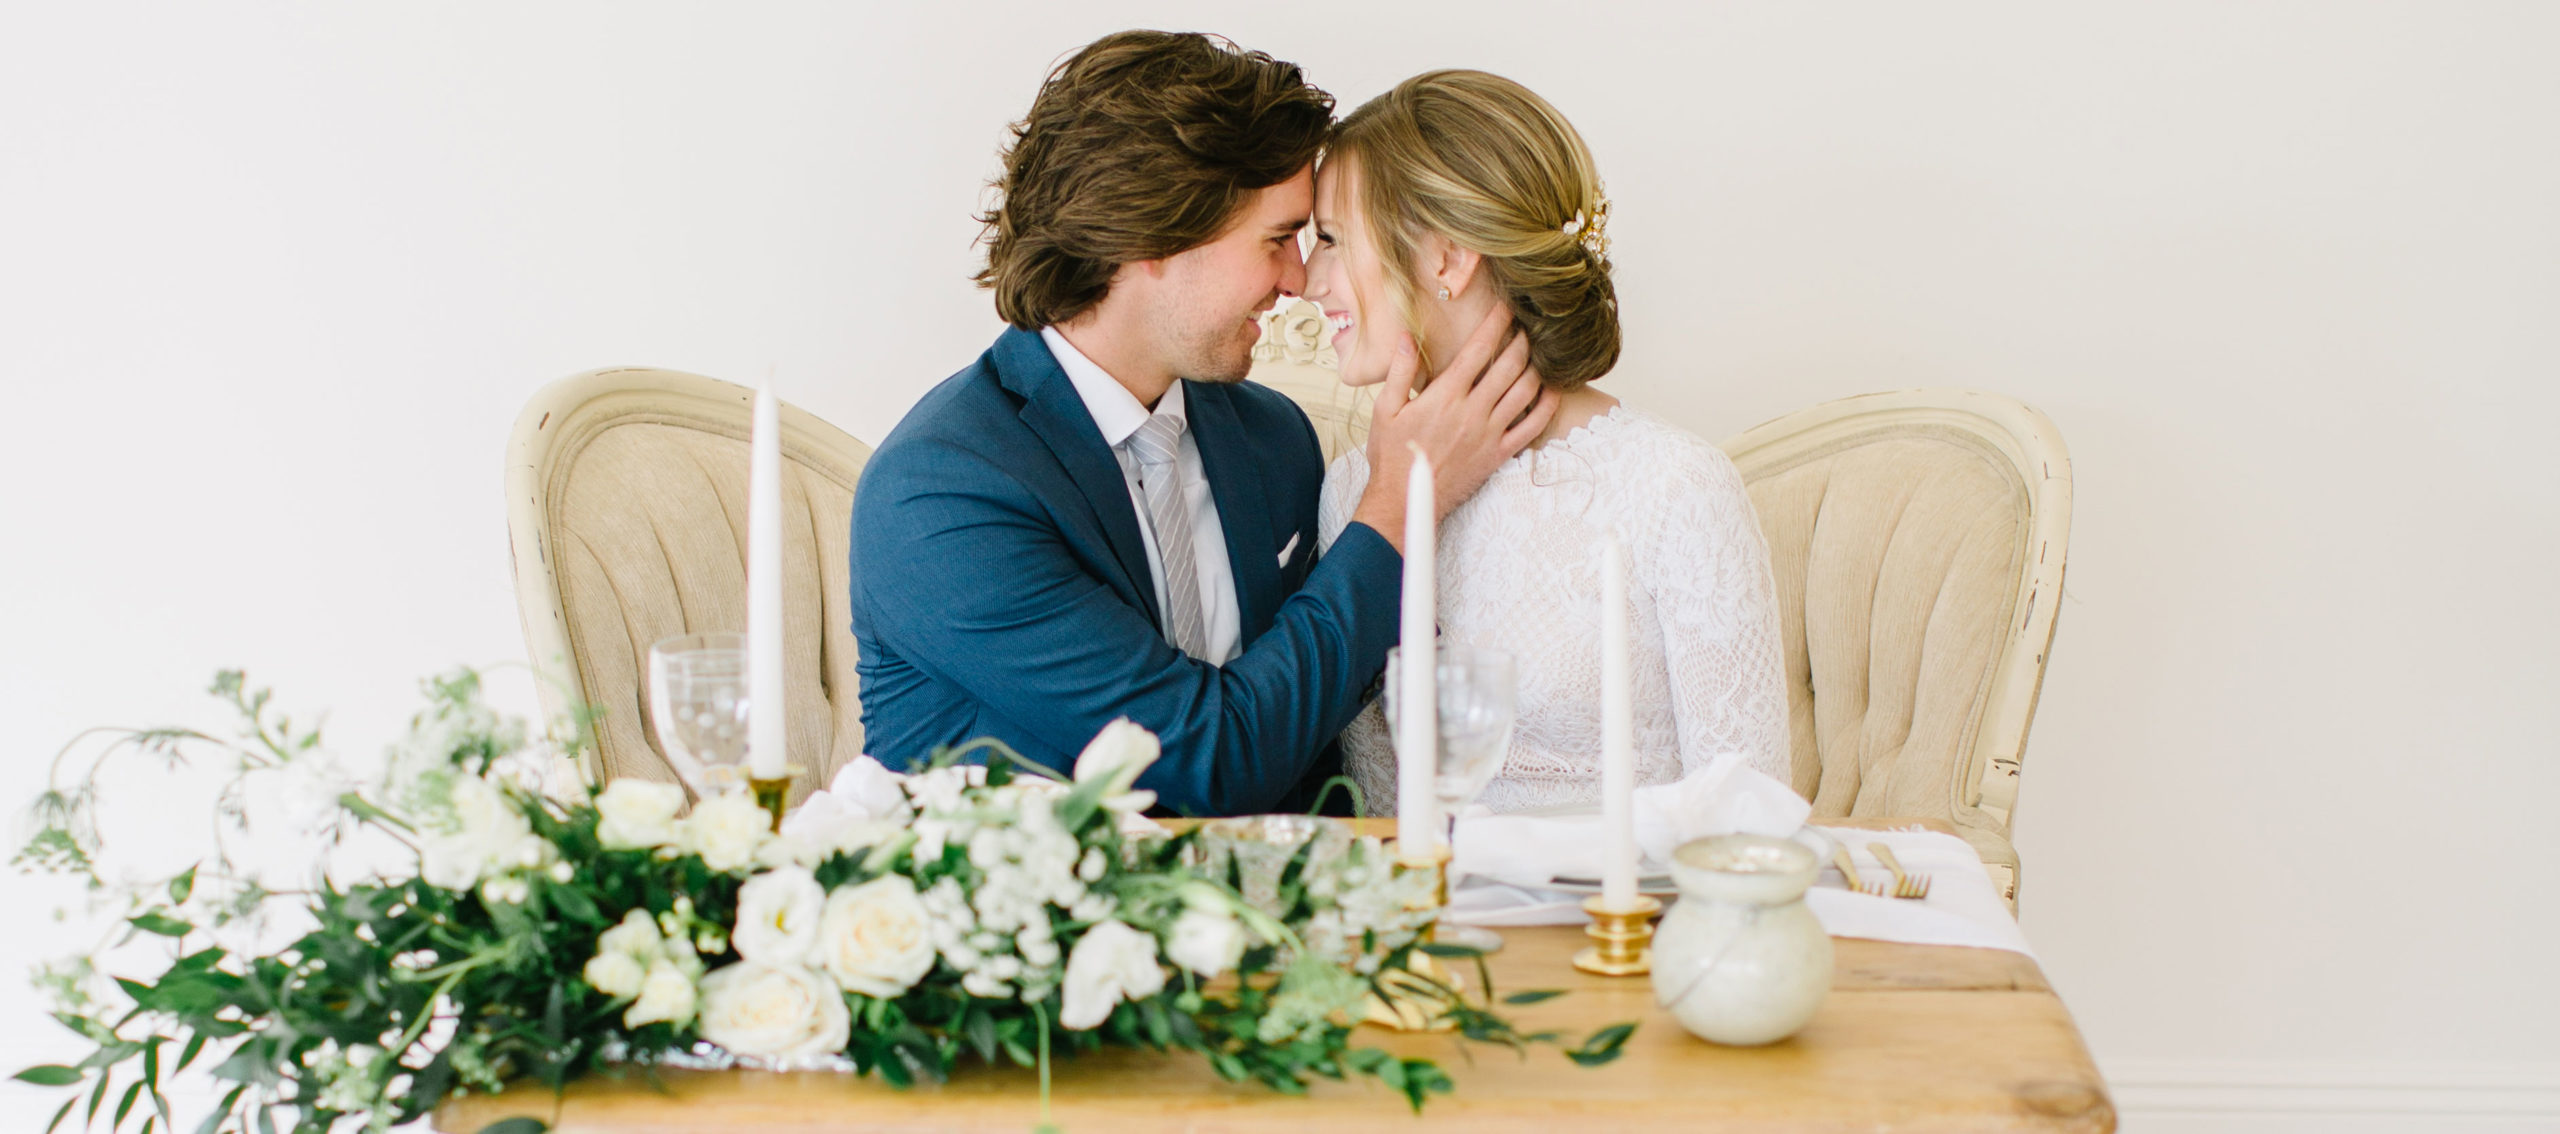 Beautiful wedding photos that go hand-in-hand with a beautiful experience